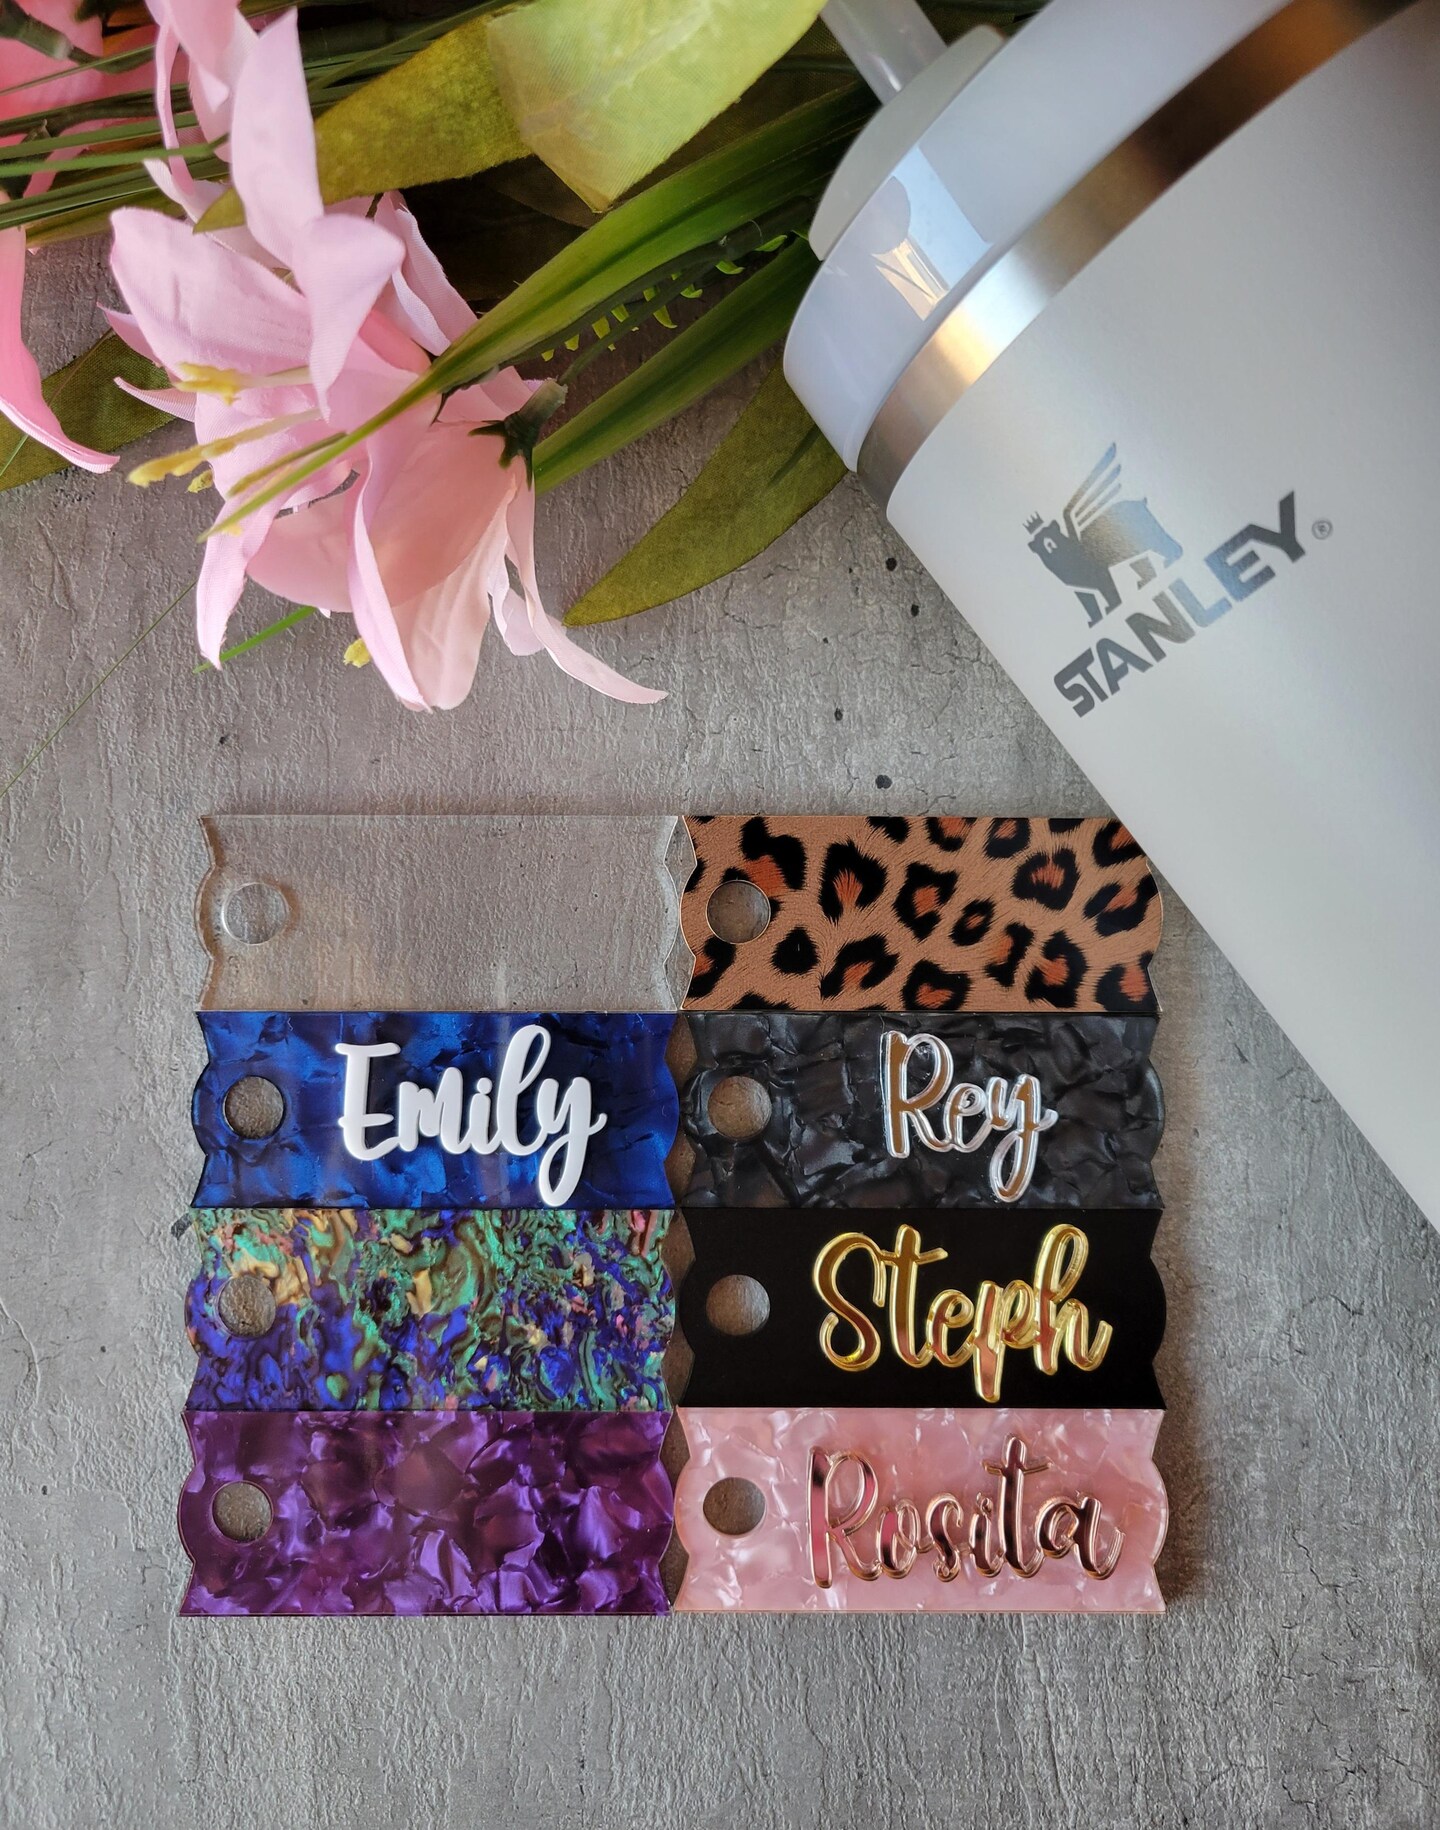 Stanley Name Plate 40 Oz Tumbler Name Plate Stanley Personalized